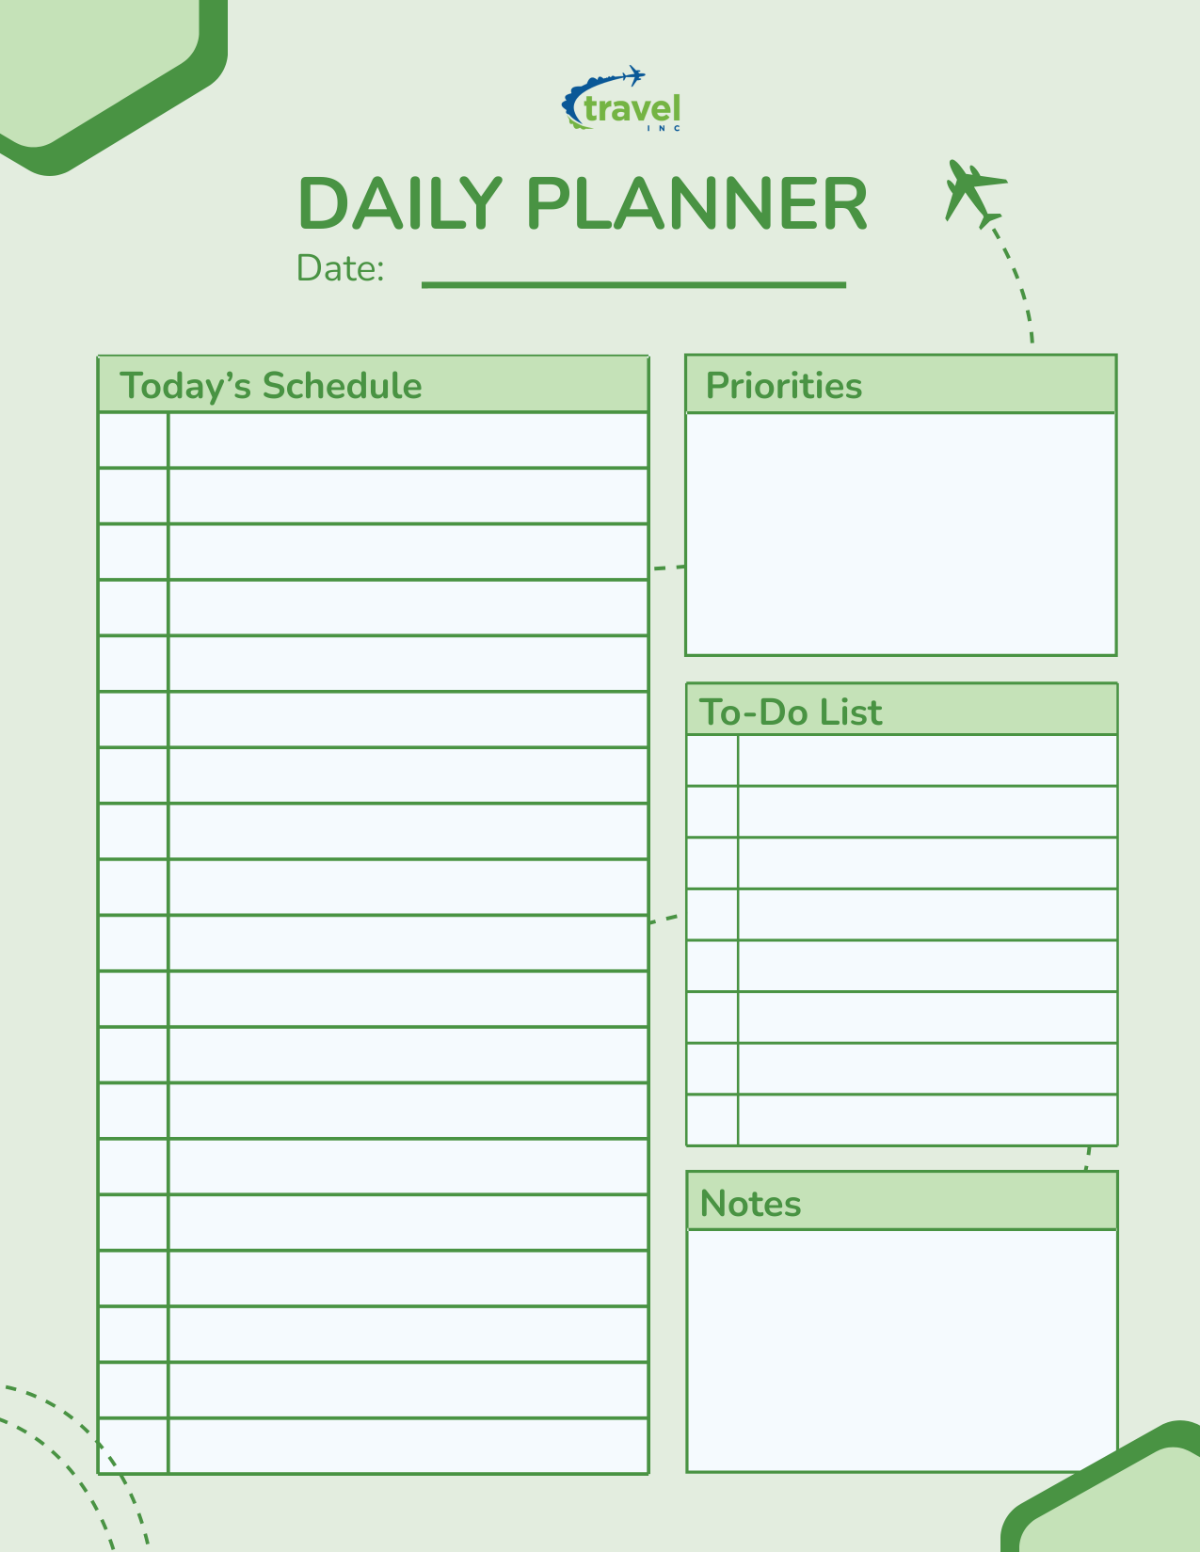 Travel Agency Daily Planner